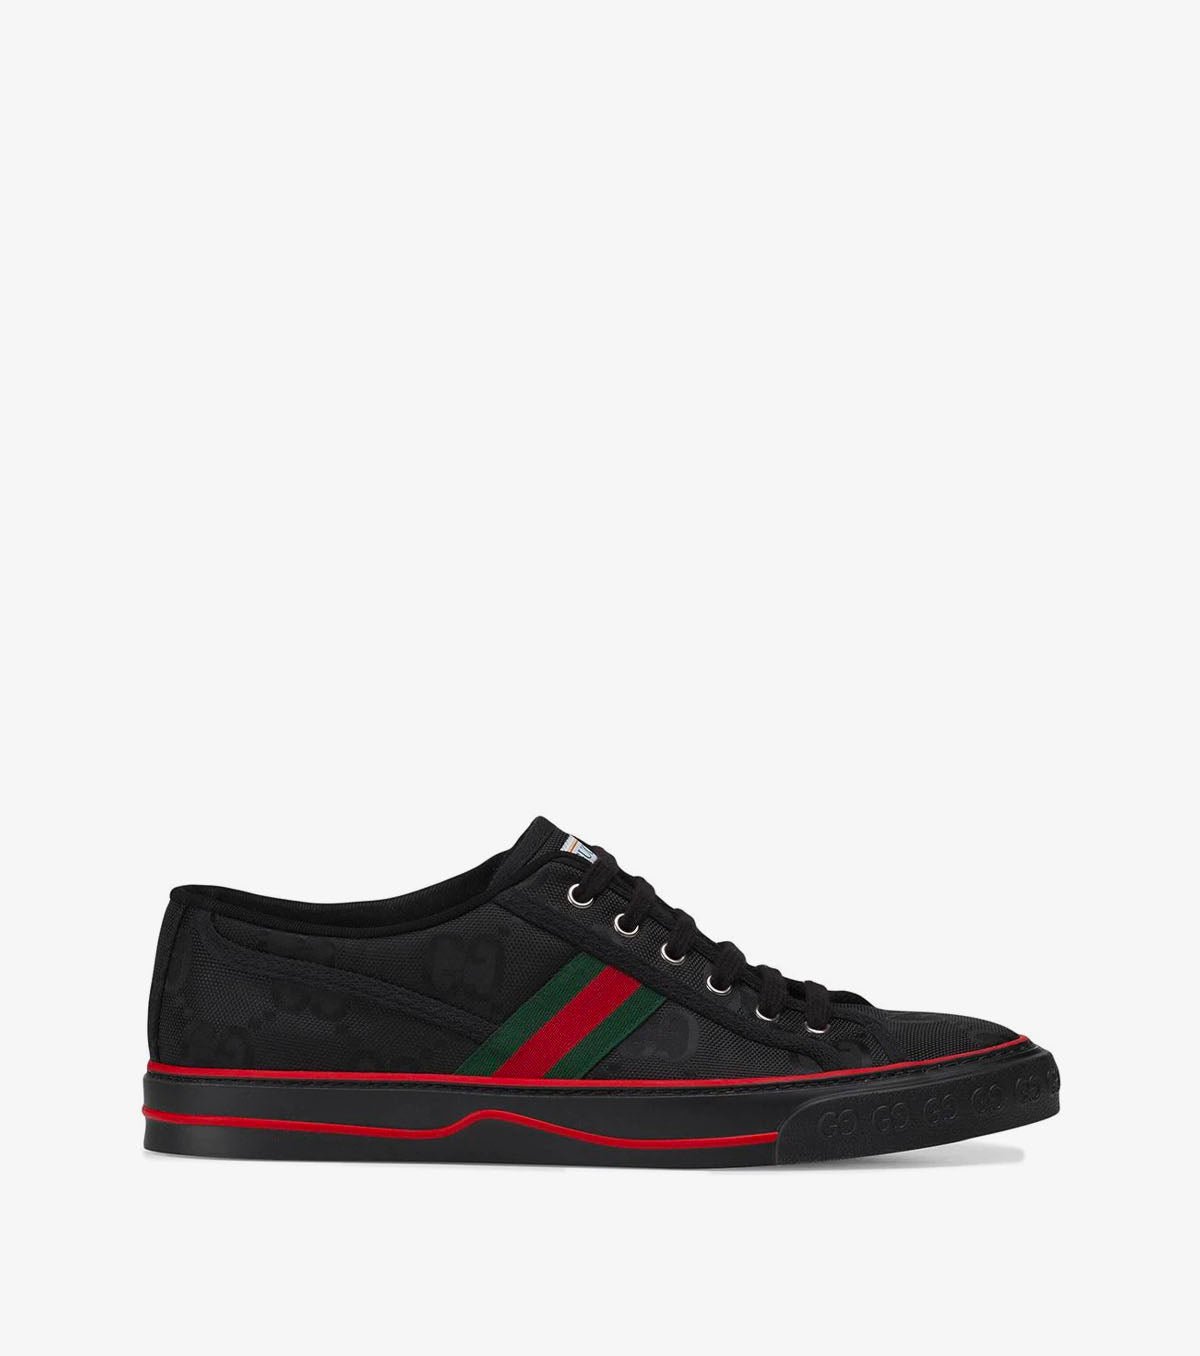 Off The Grid GG Supreme canvas low-top - SNKRBASE